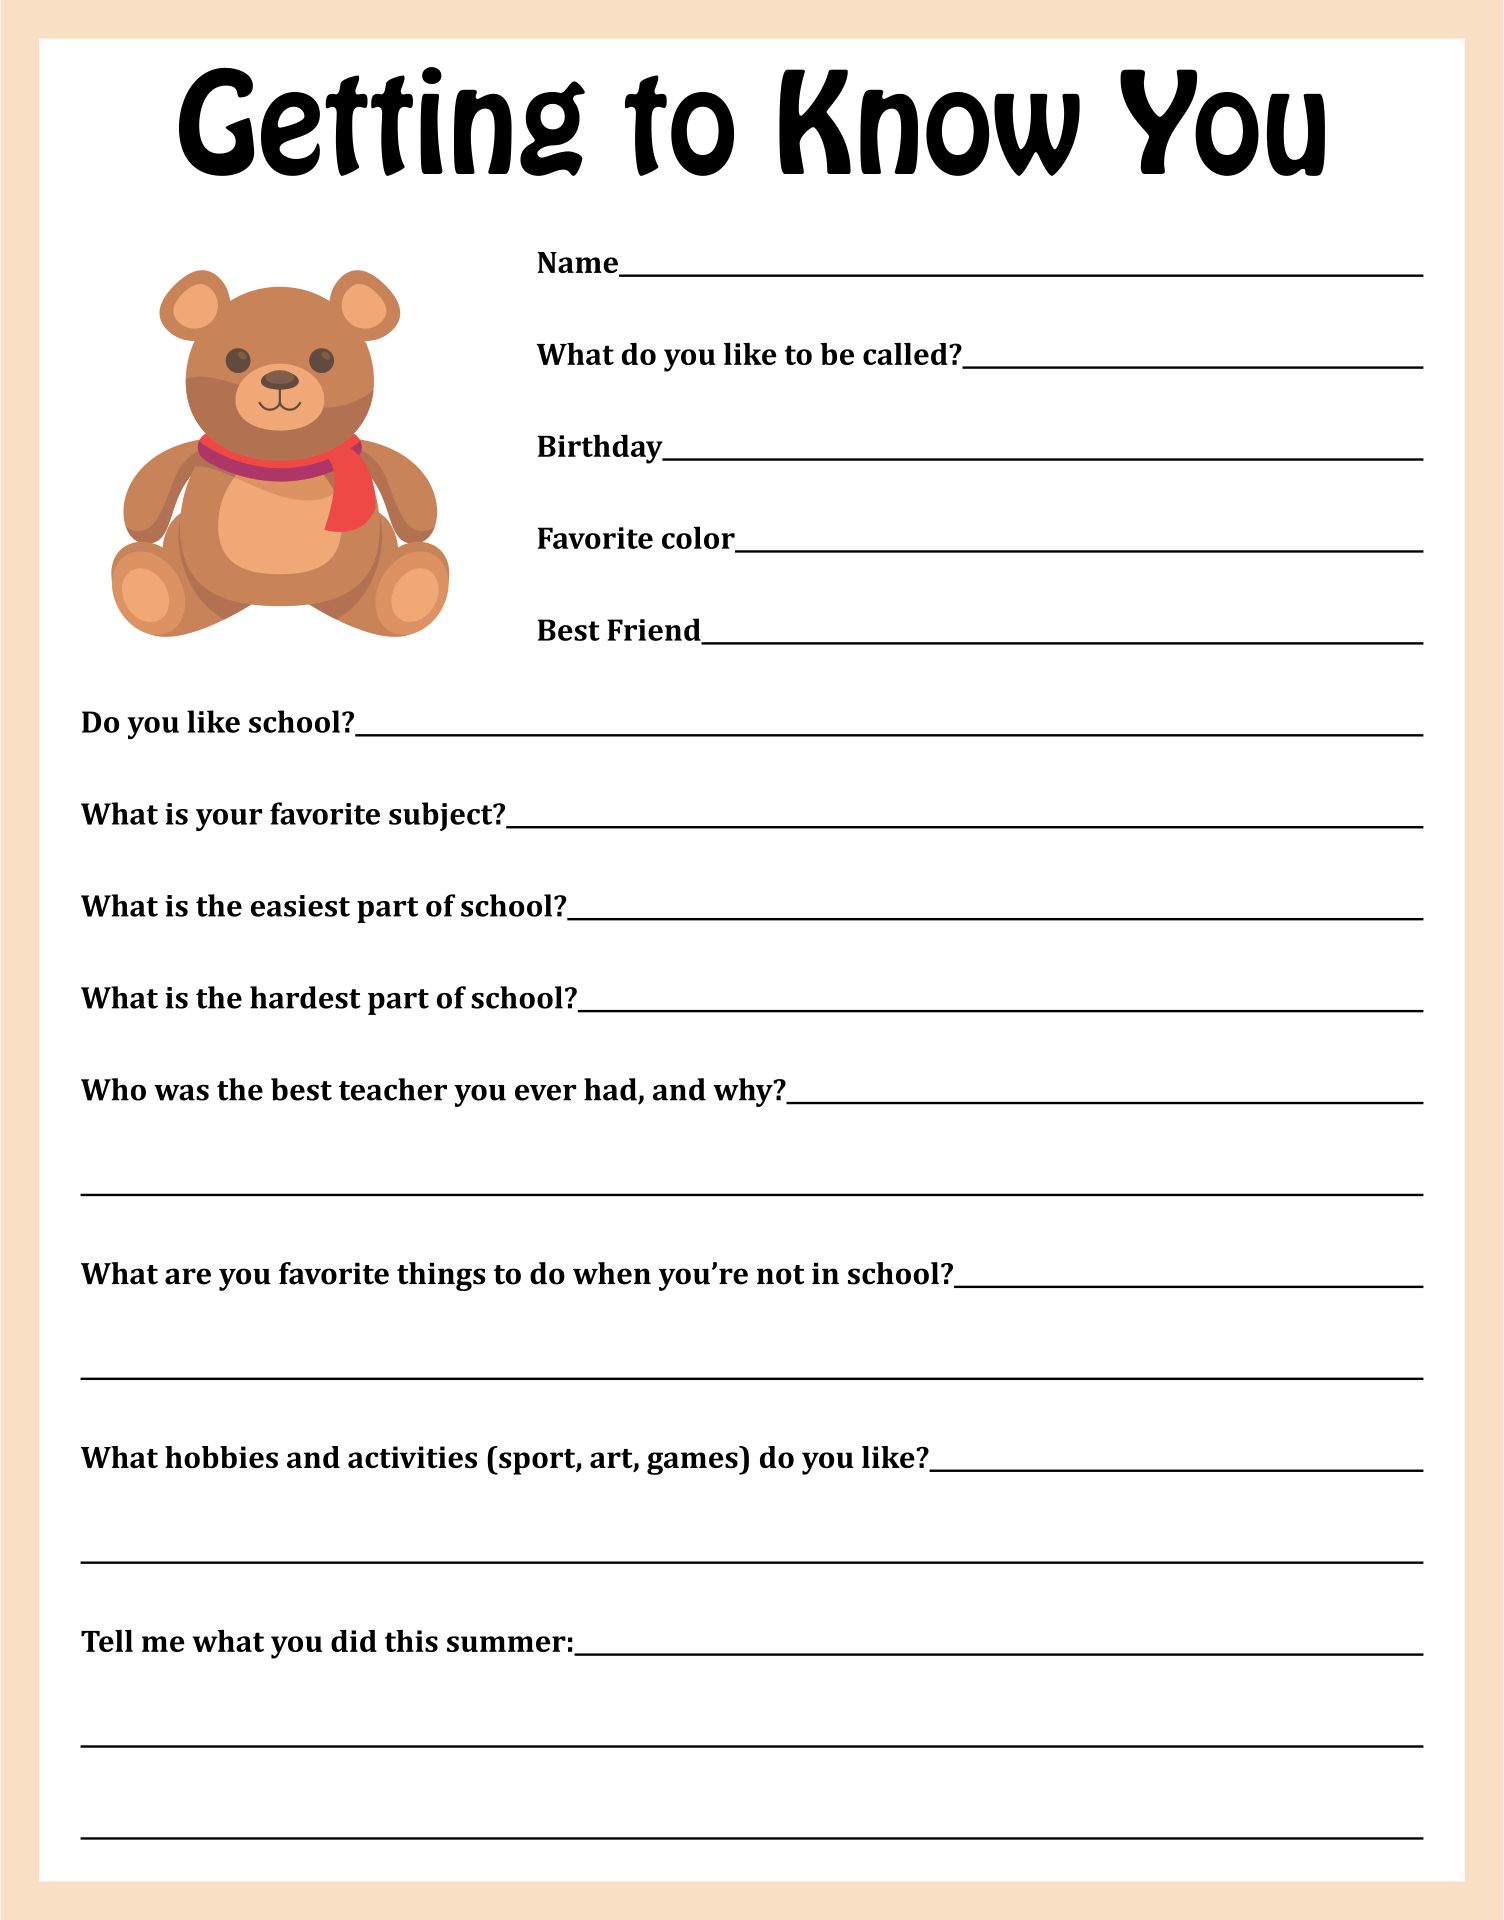 8-best-images-of-classroom-getting-to-know-you-printables-get-to-know-you-worksheet-middle